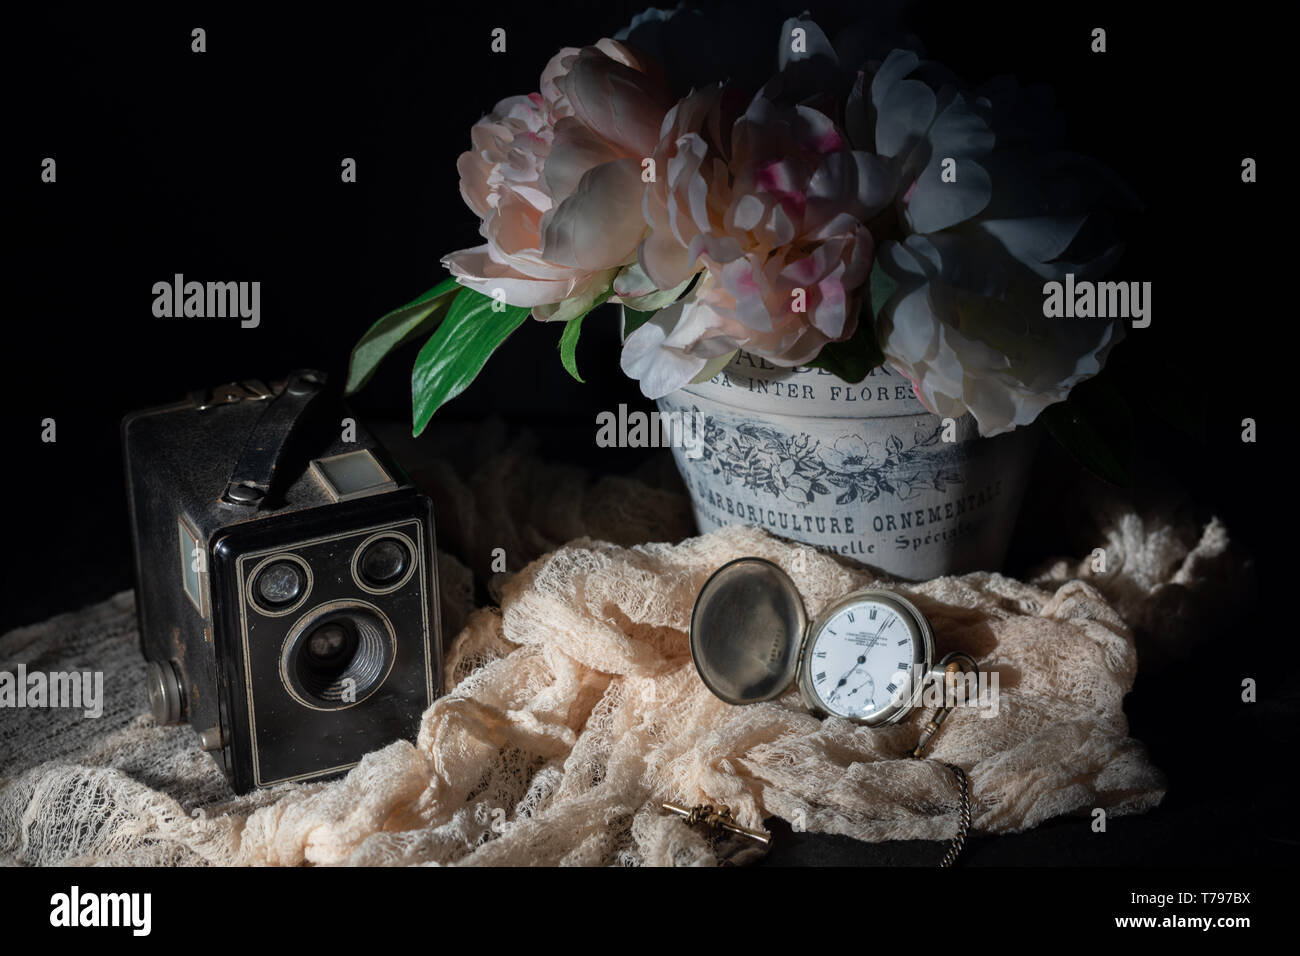 Vintage camera, old fob watch and flowers Stock Photo